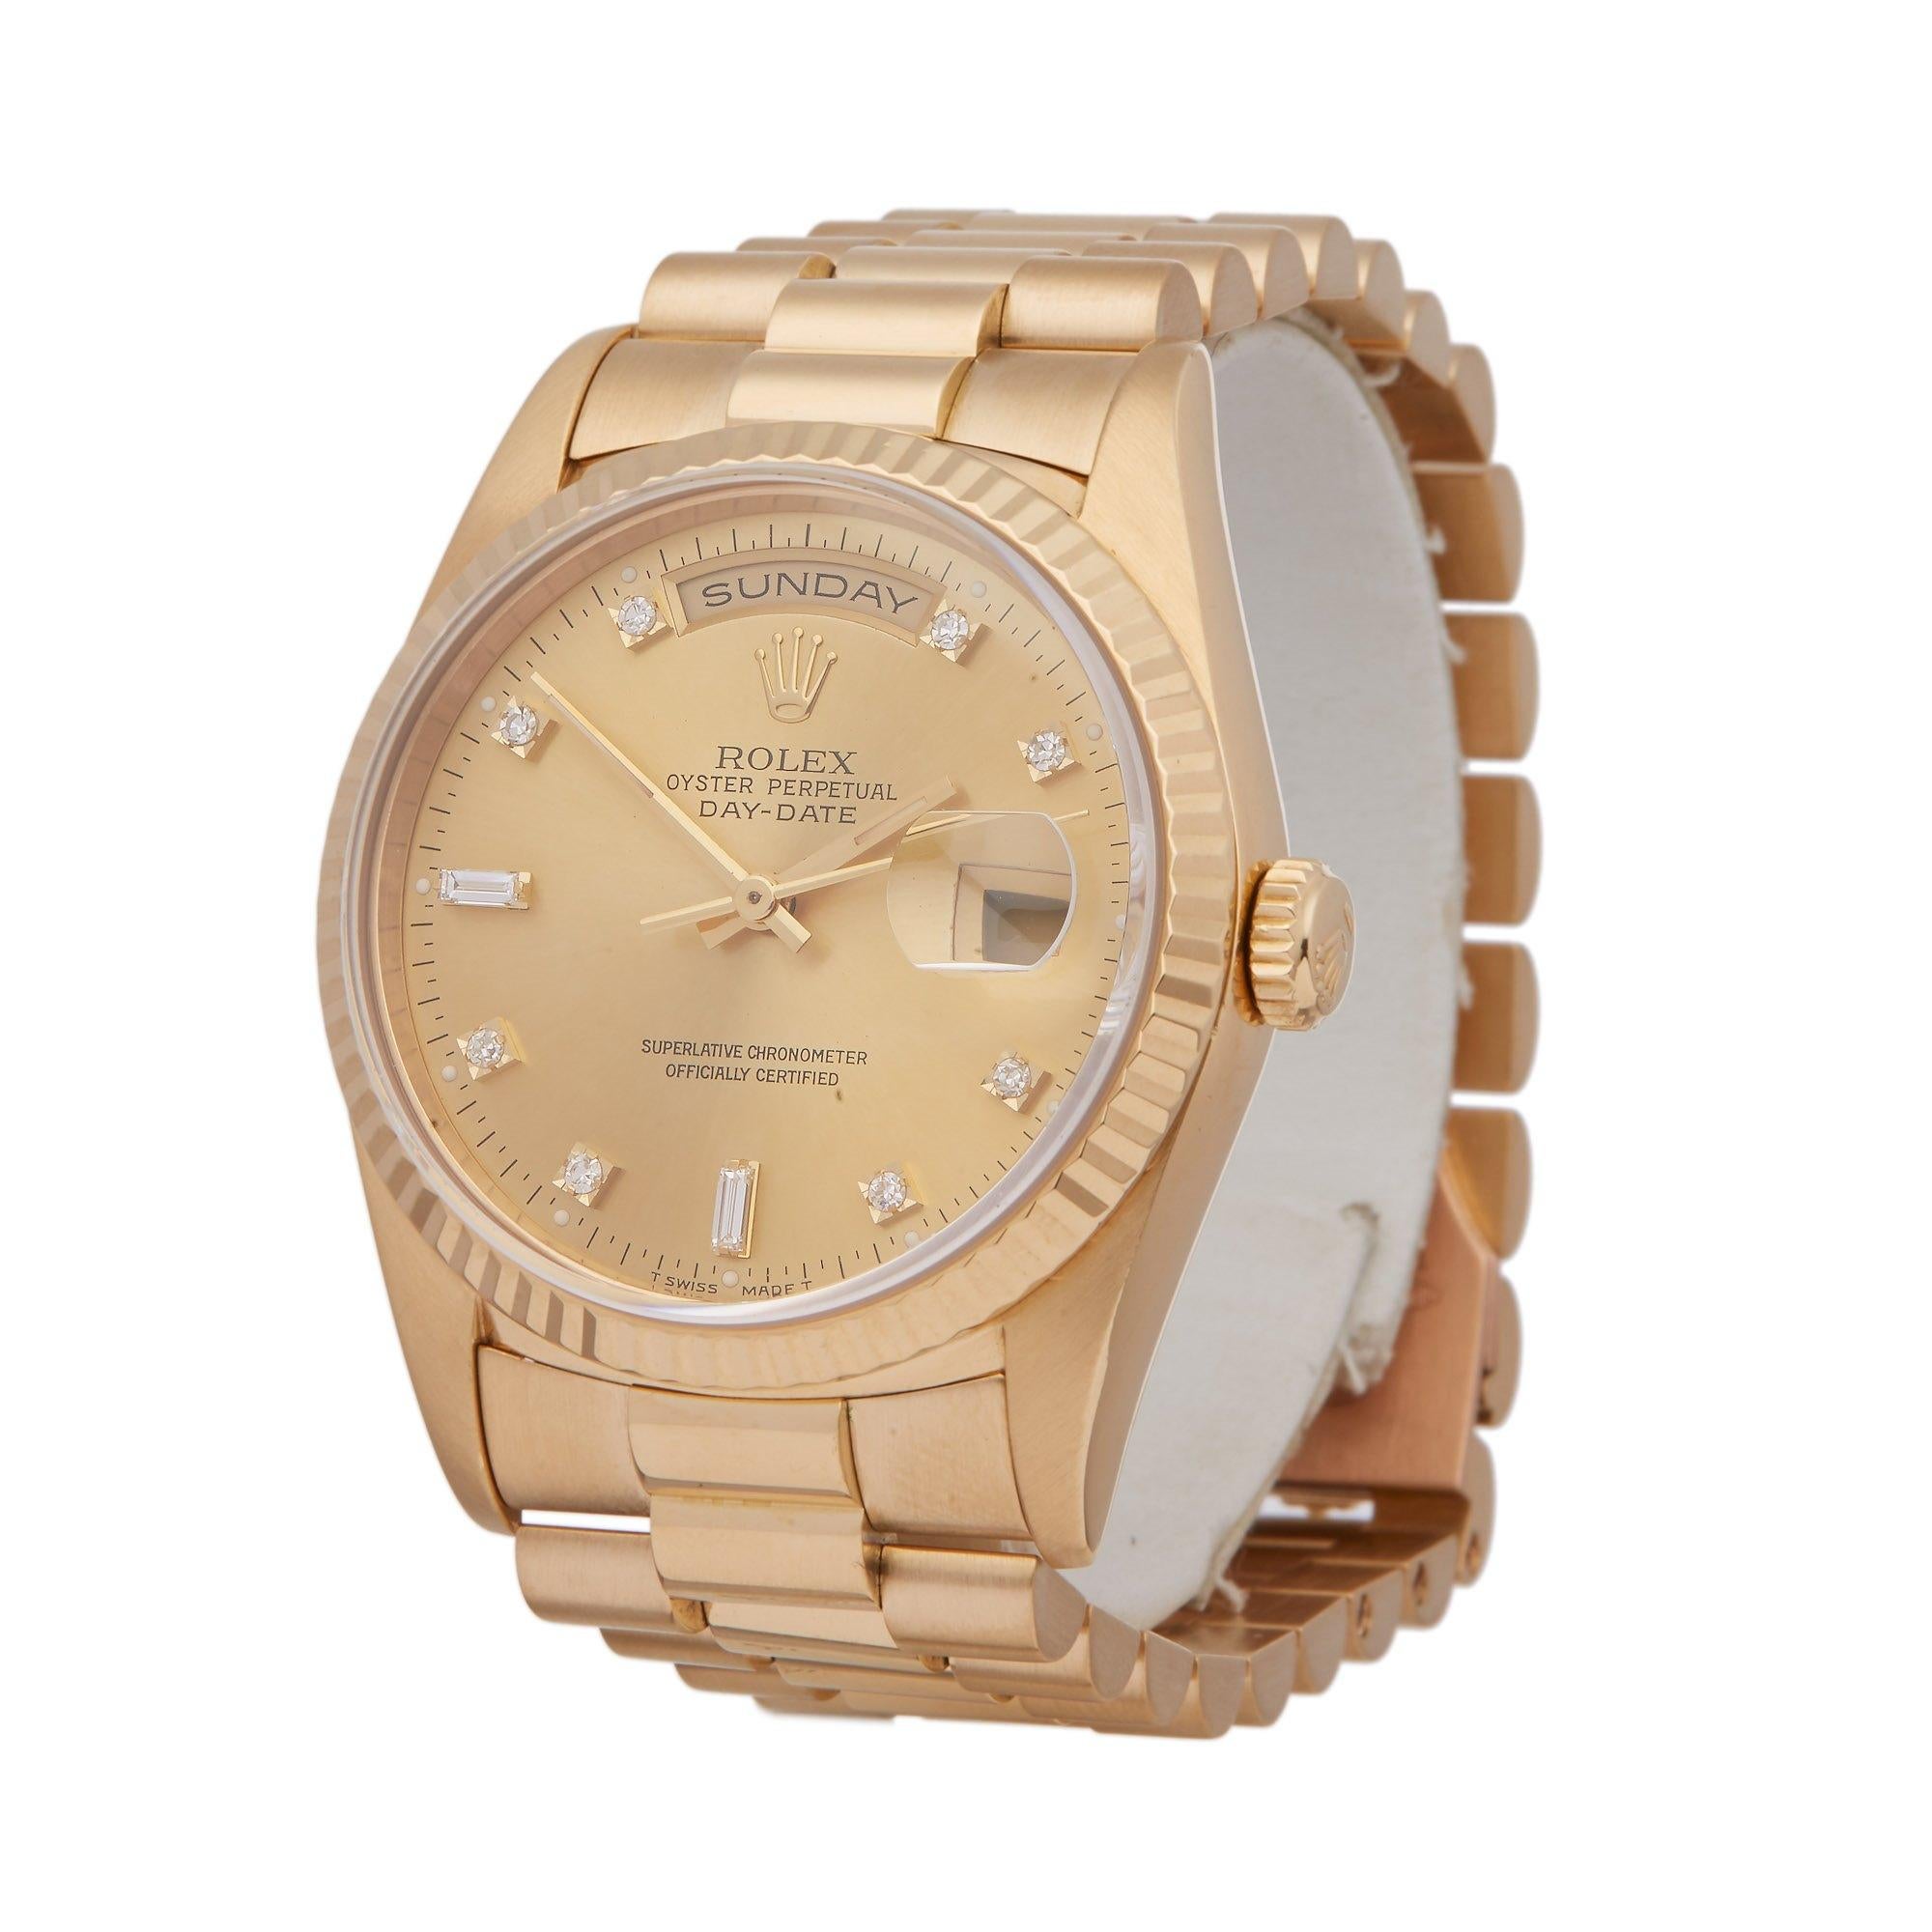 Xupes Reference: W007208
Manufacturer: Rolex
Model: Day-Date
Model Variant: 36
Model Number: 18238
Age: 1996
Gender: Men
Complete With: Rolex Box & Manuals
Dial: Champagne Diamond
Glass: Sapphire Crystal
Case Size: 36mm
Case Material: Yellow